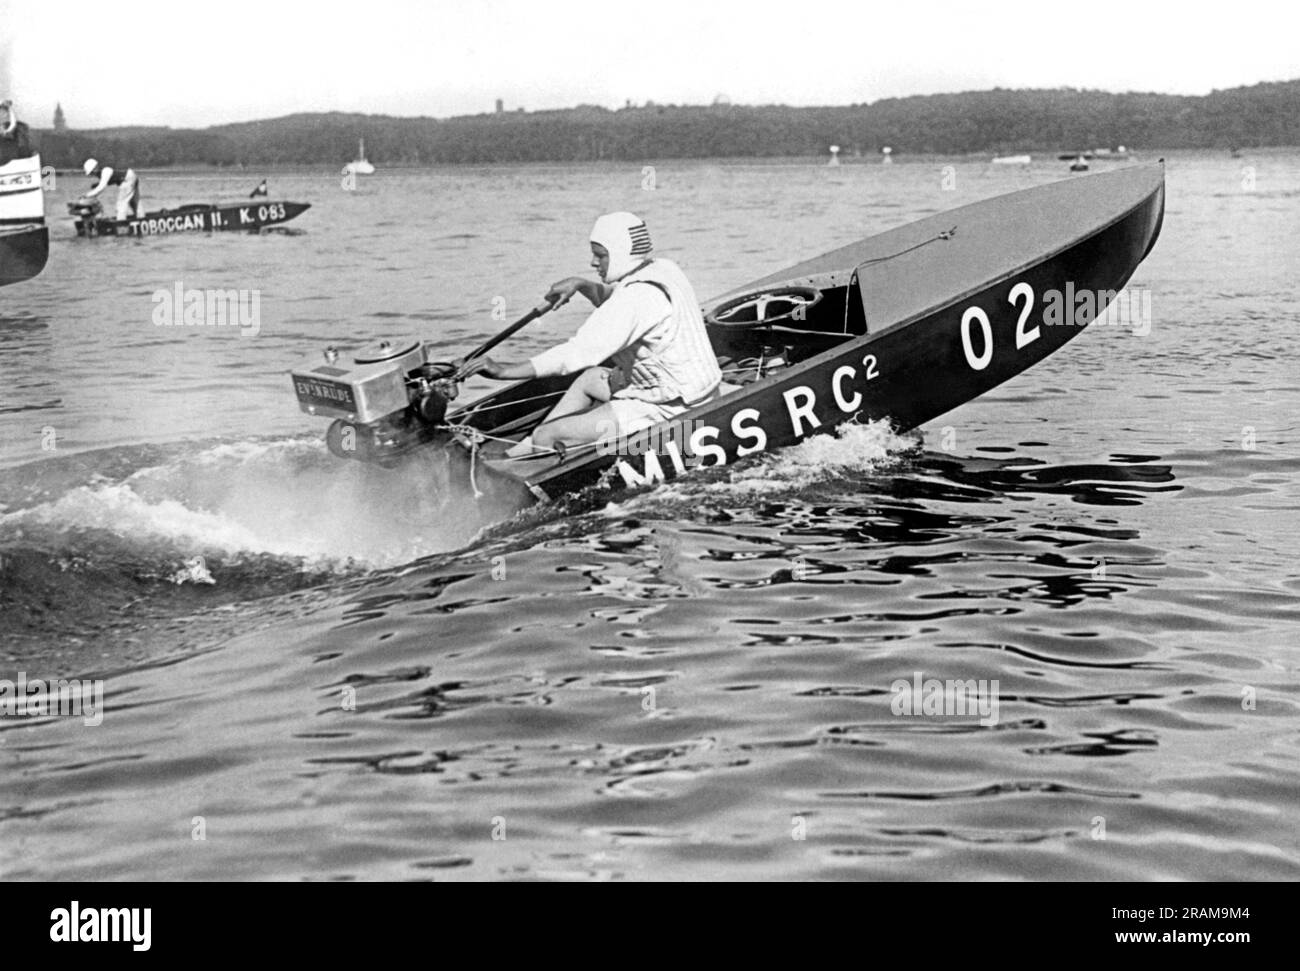 Lake Templin, Germany:  1926. Helen Hentschel of New York wins the Class B Outboard Races on Lake Templin in Germany, with an  average speed of 28.7 mph. Stock Photo